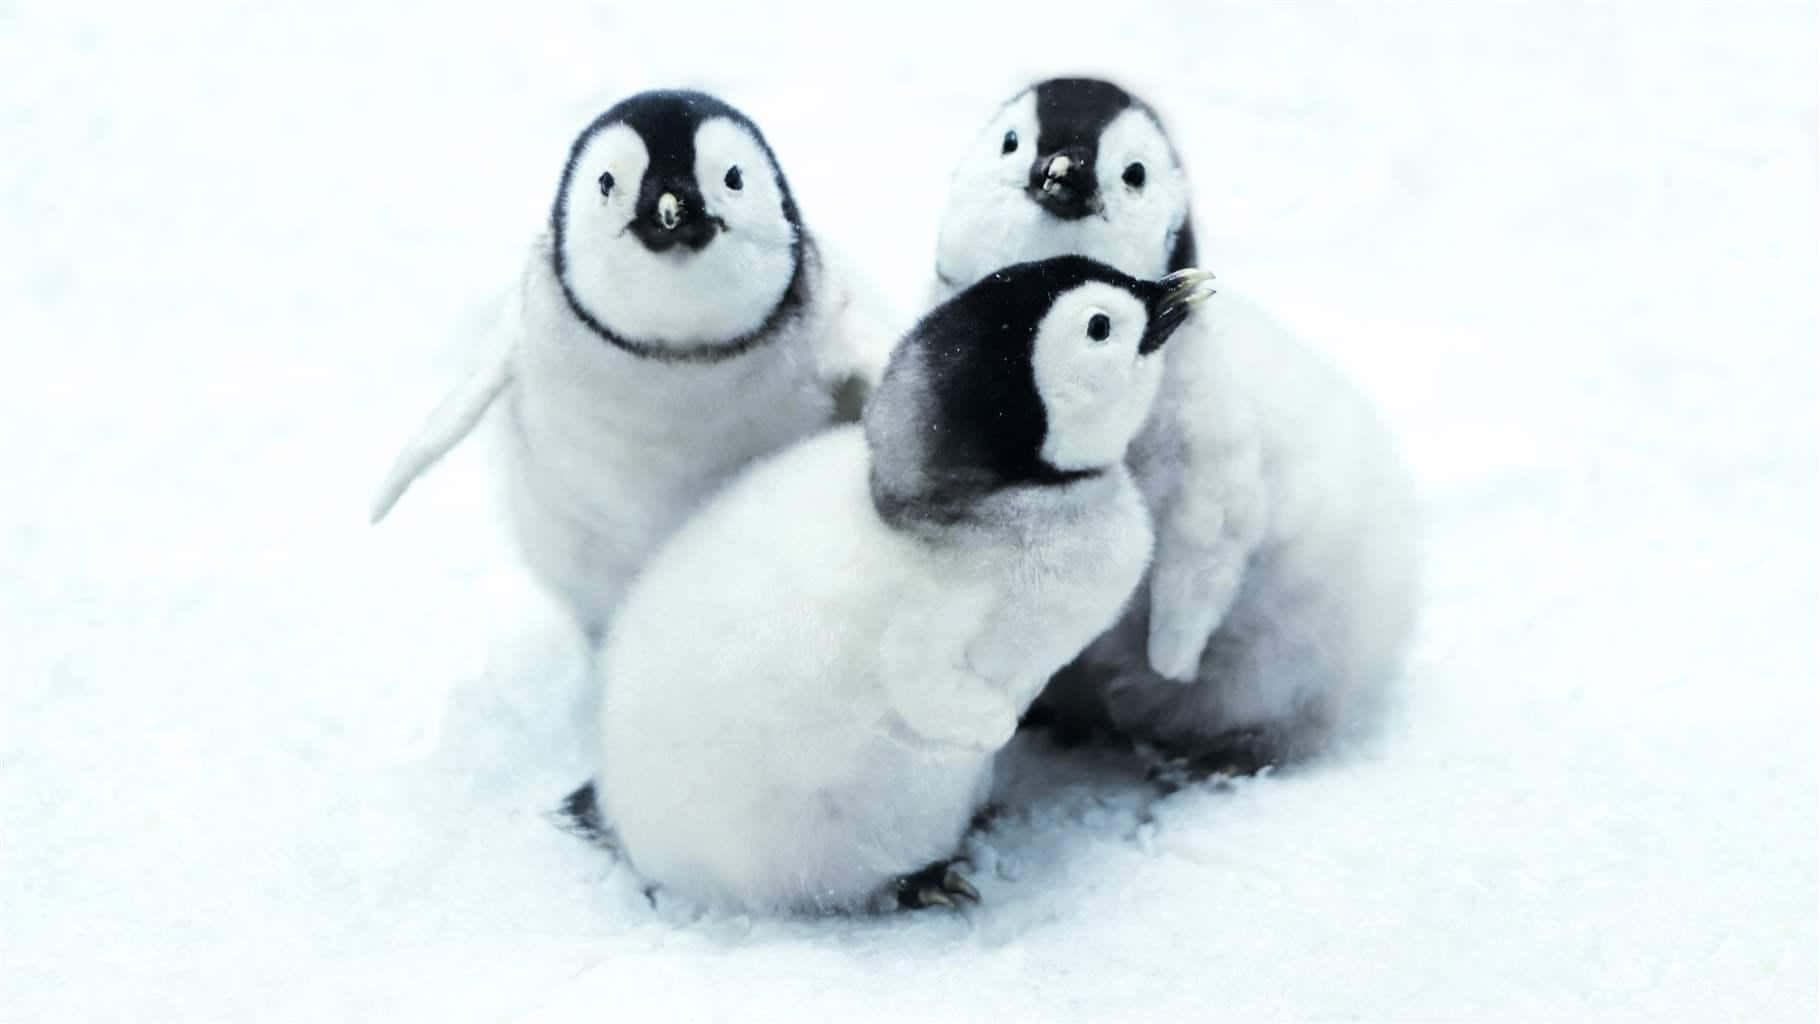 Three Penguins Standing In The Snow